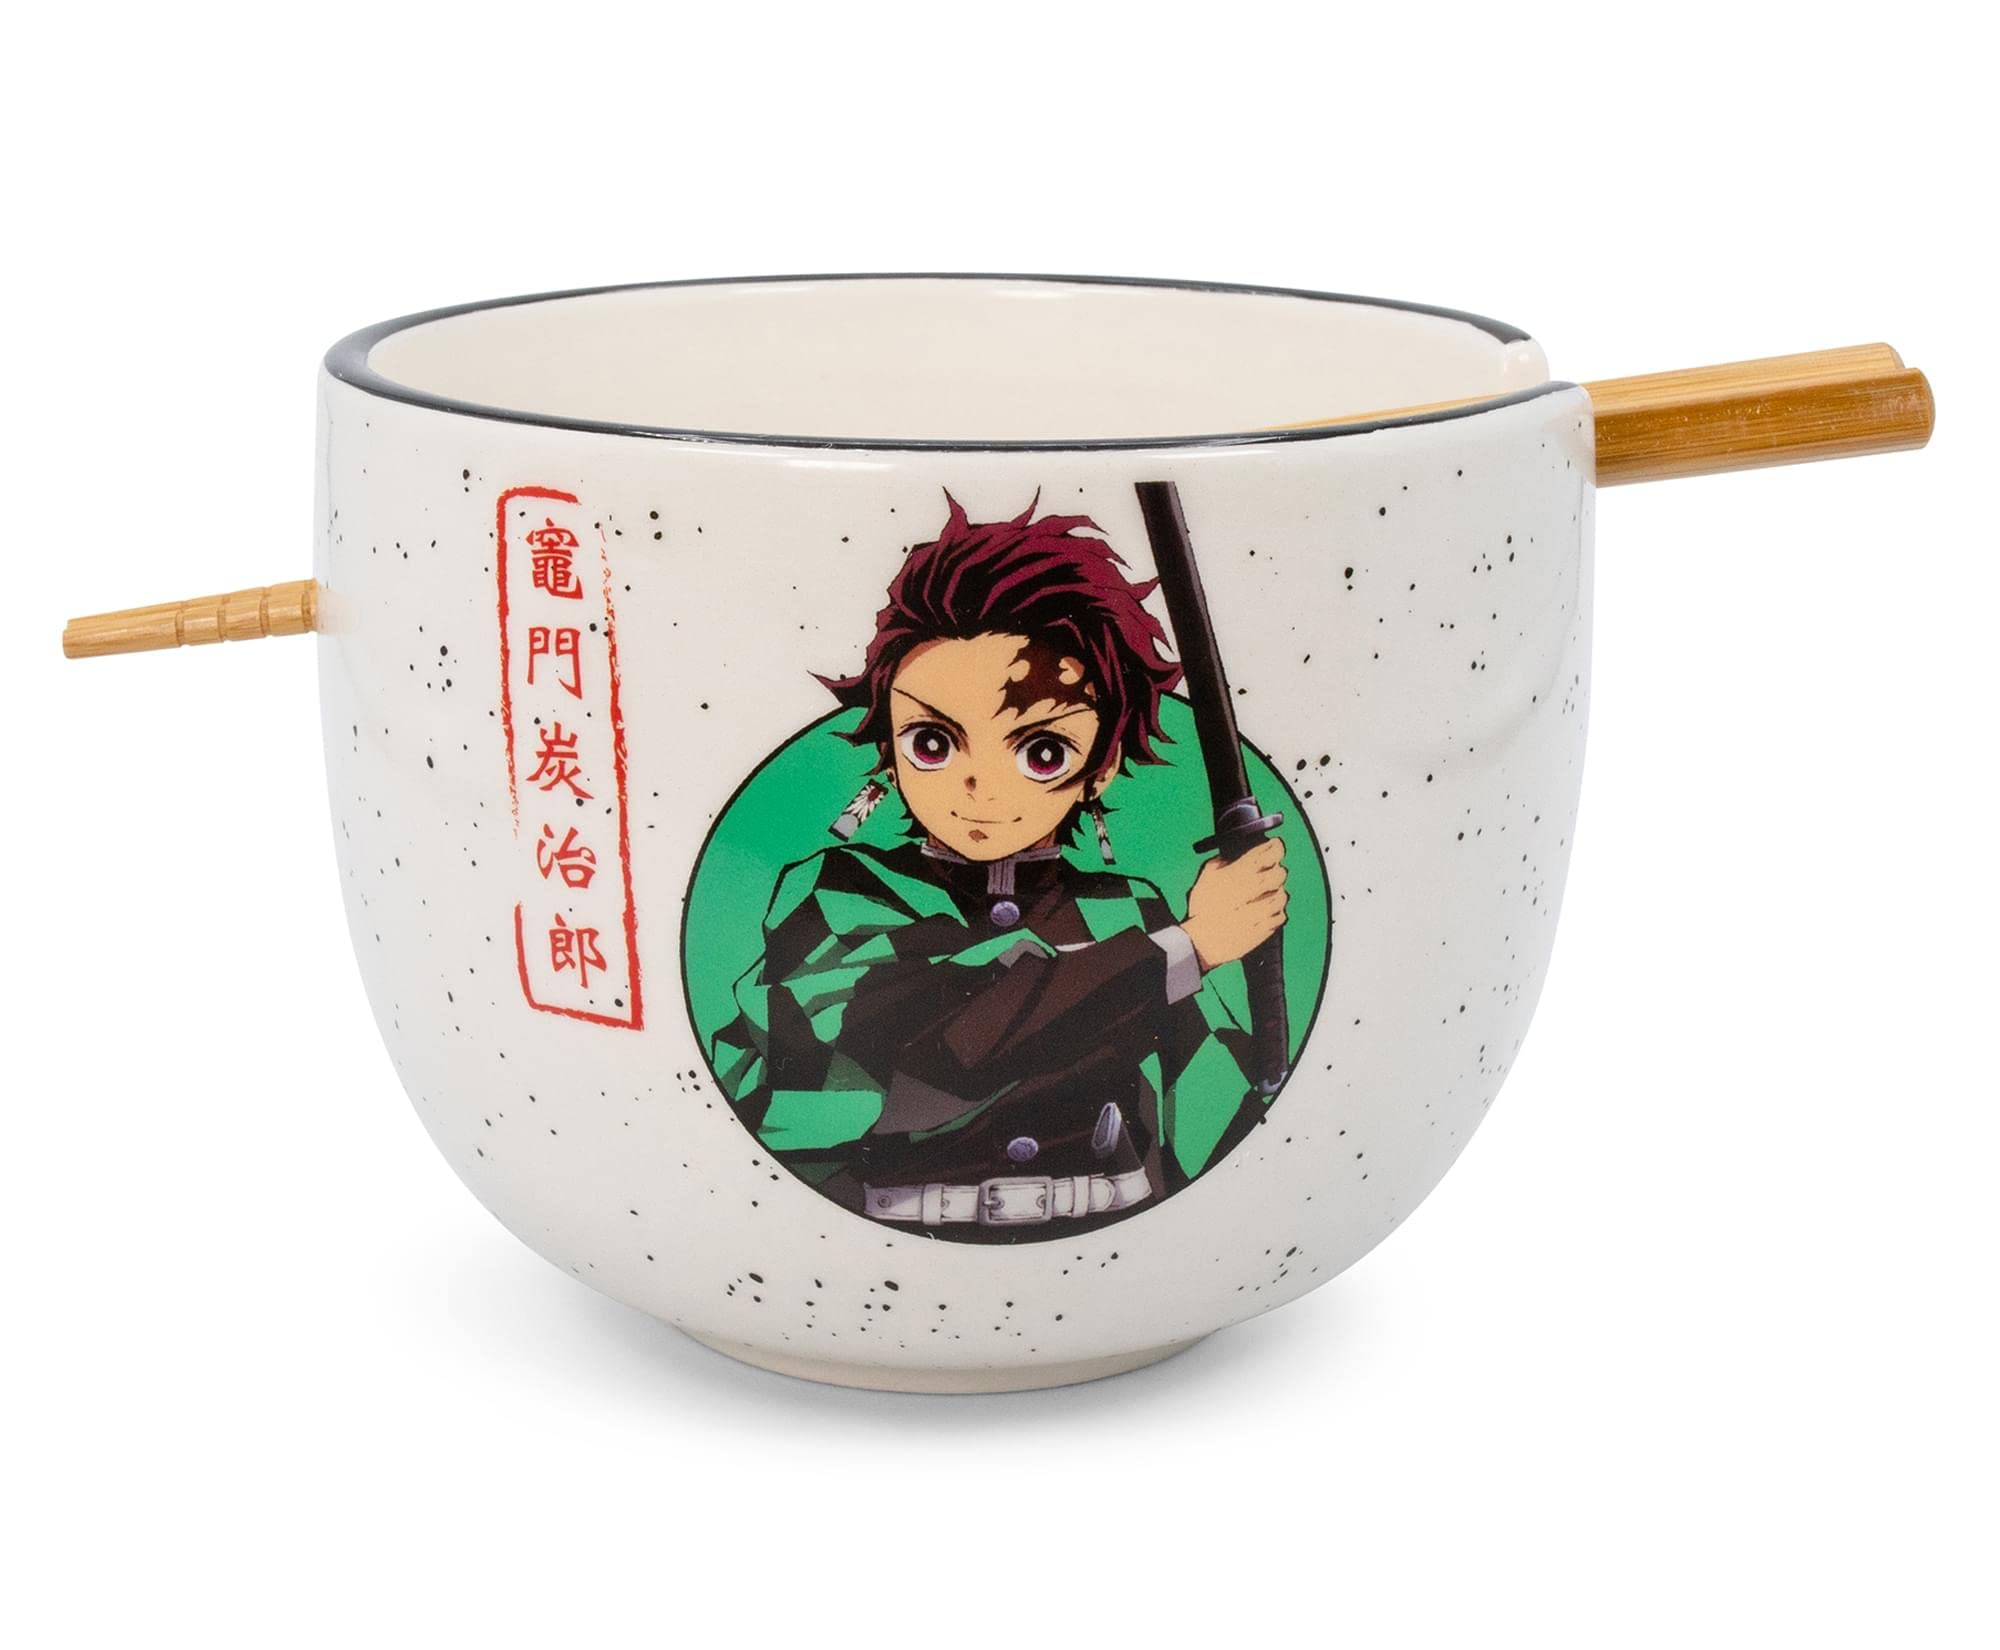 Demon Slayer Tanjiro Kamado Japanese Ceramic Dinnerware Set | Includes 16-Ounce Ramen Noodle Bowl and Wooden Chopsticks | Asian Food Dish Set For Home & Kitchen | Anime Manga Gifts and Collectibles